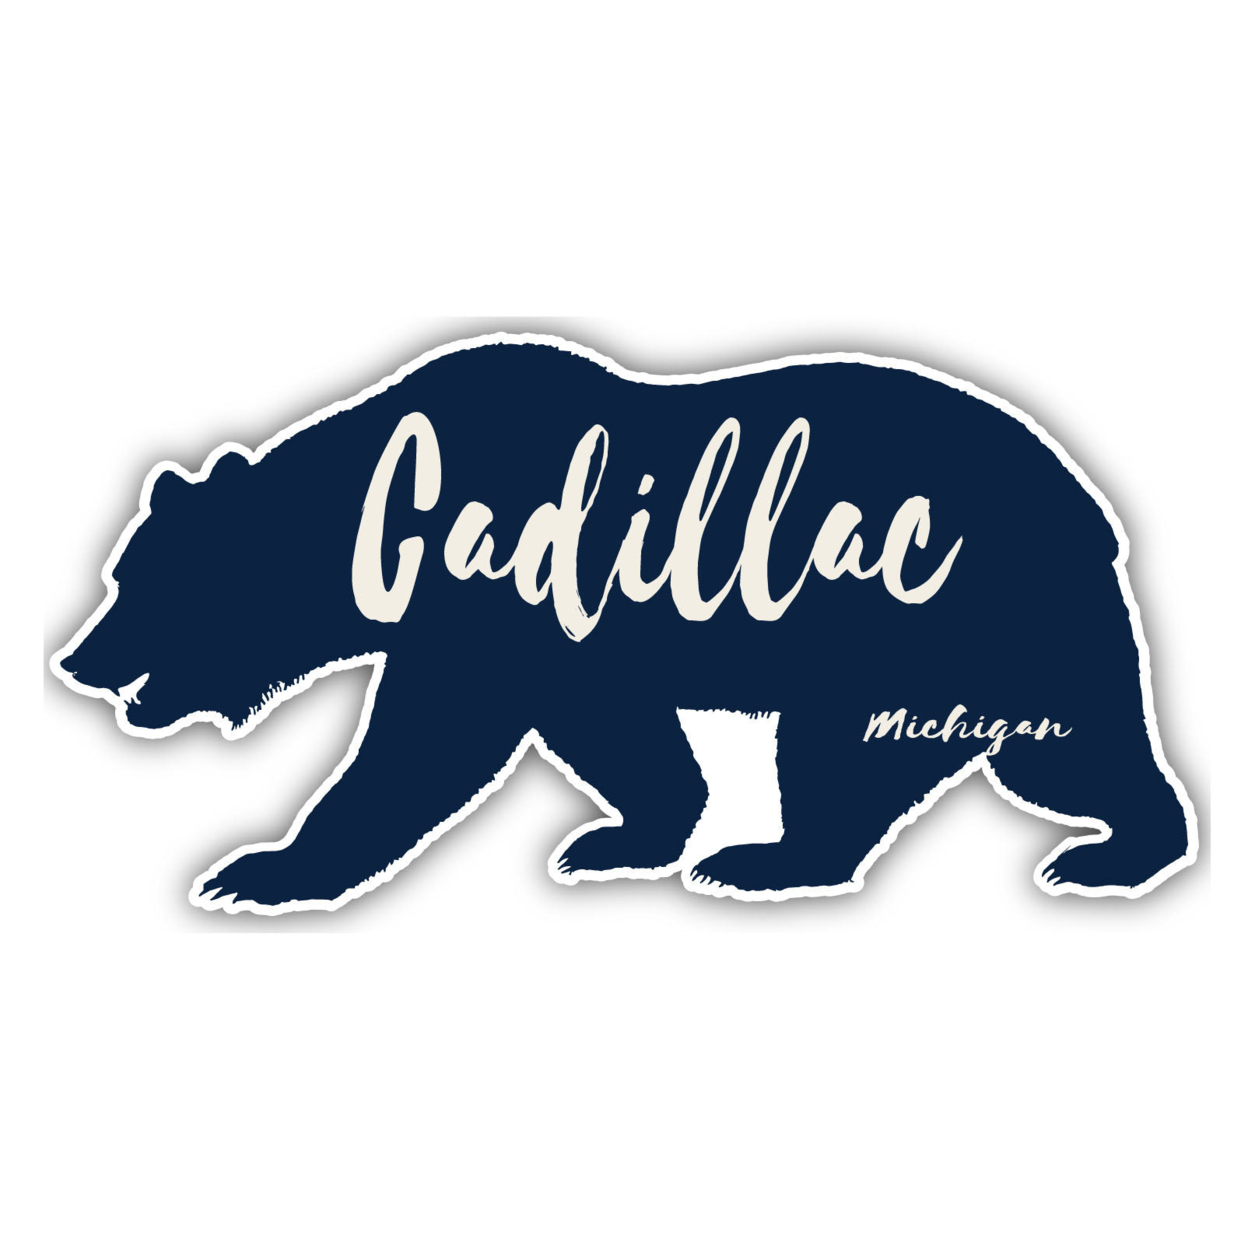 Cadillac Michigan Souvenir Decorative Stickers (Choose Theme And Size) - 4-Pack, 2-Inch, Bear